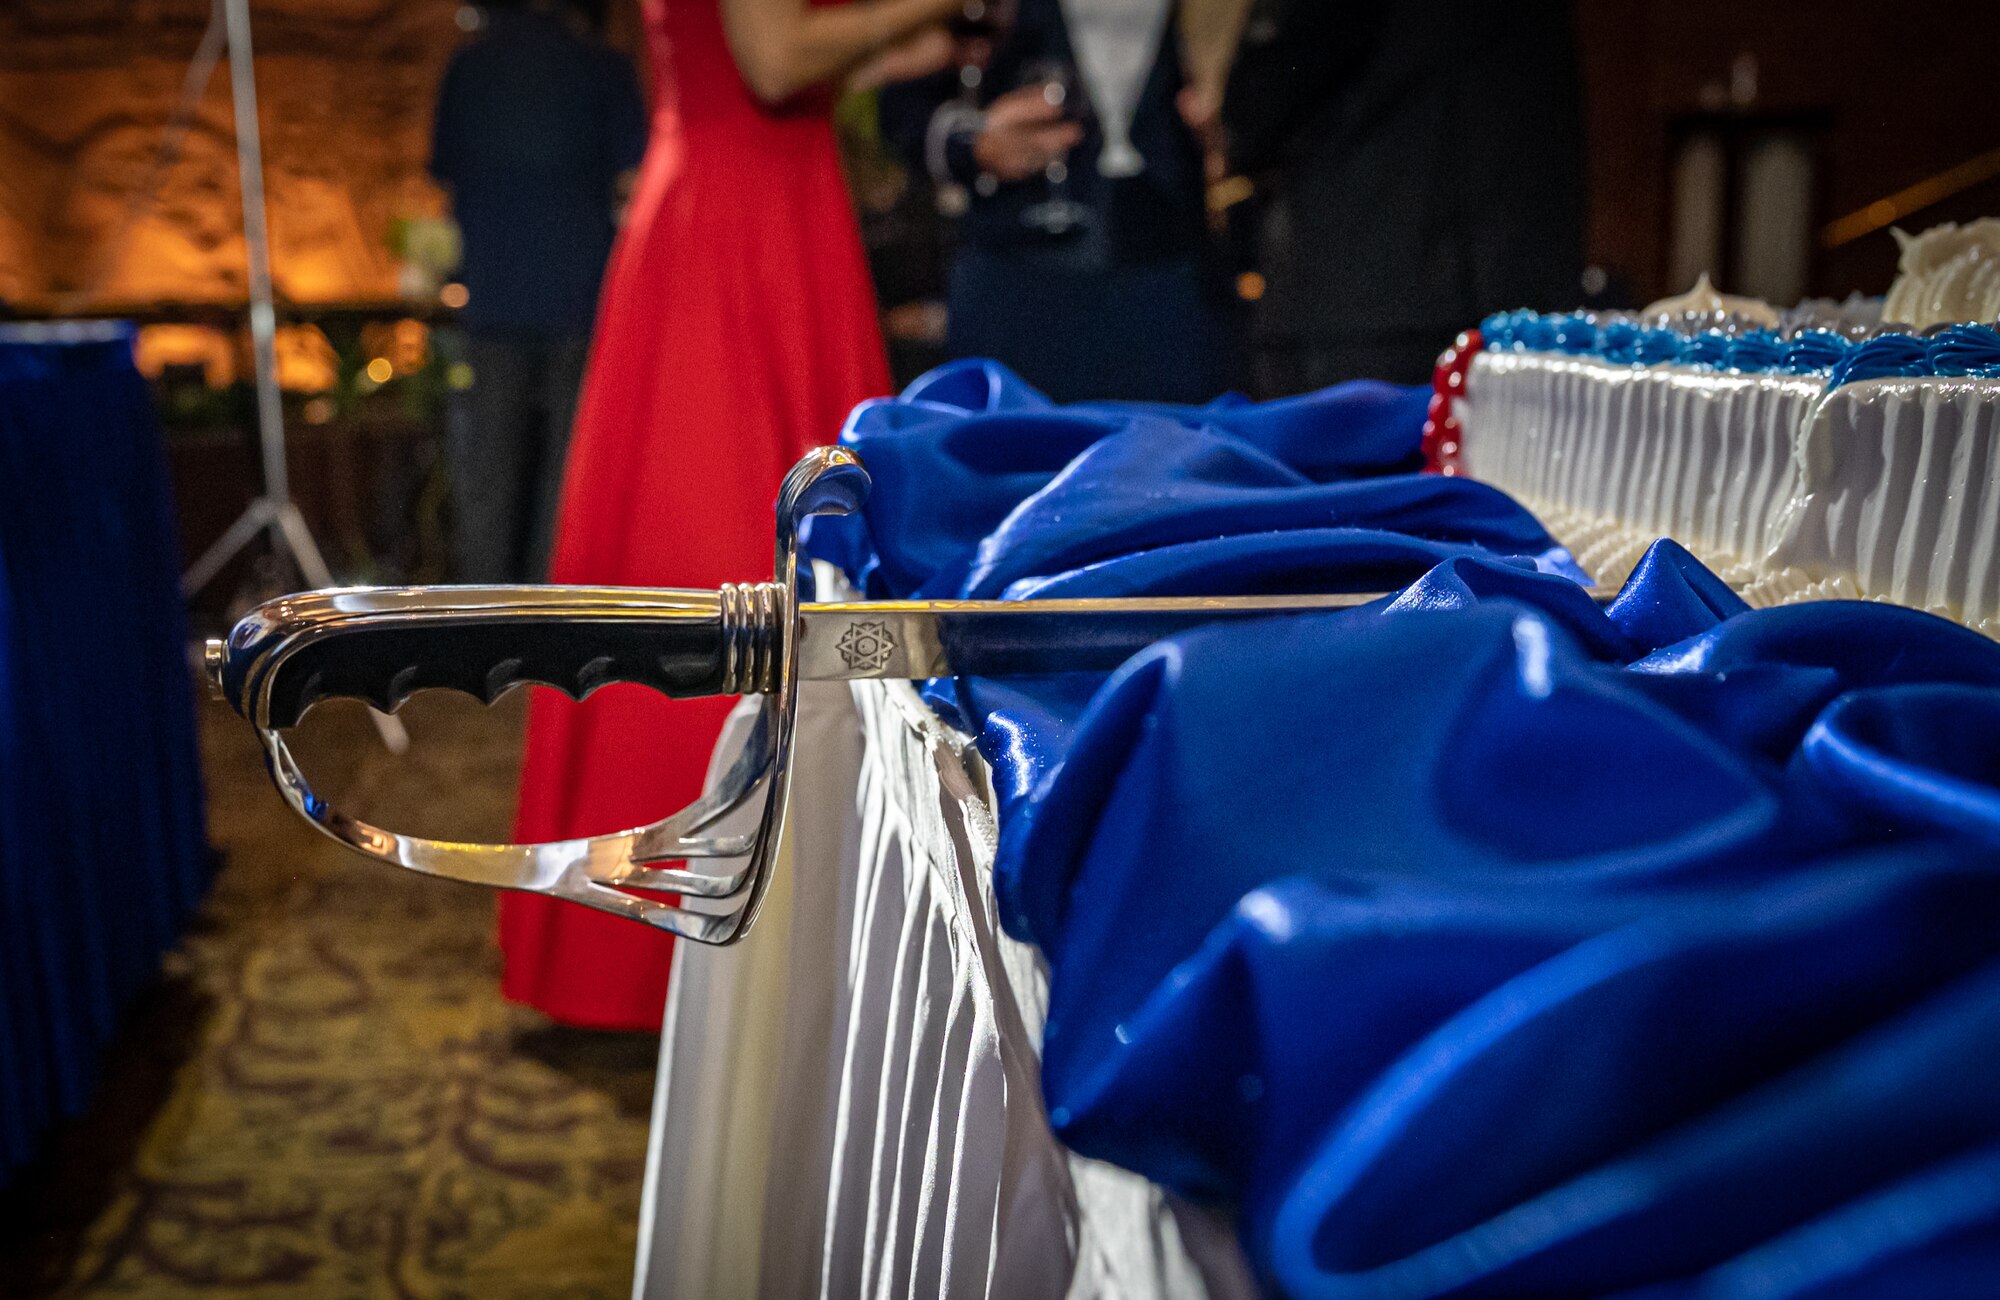 A ceremonial sword used to slice a birthday cake at the 76th Air Force Ball lays on a table, at U.S. Army Garrison Yongsan, Republic of Korea, Sept. 23, 2023. It is customary for the most senior and junior Airmen to cut the cake which represents the heritage between generations. (U.S. Air Force photo by Staff Sgt. Kelsea Caballero)